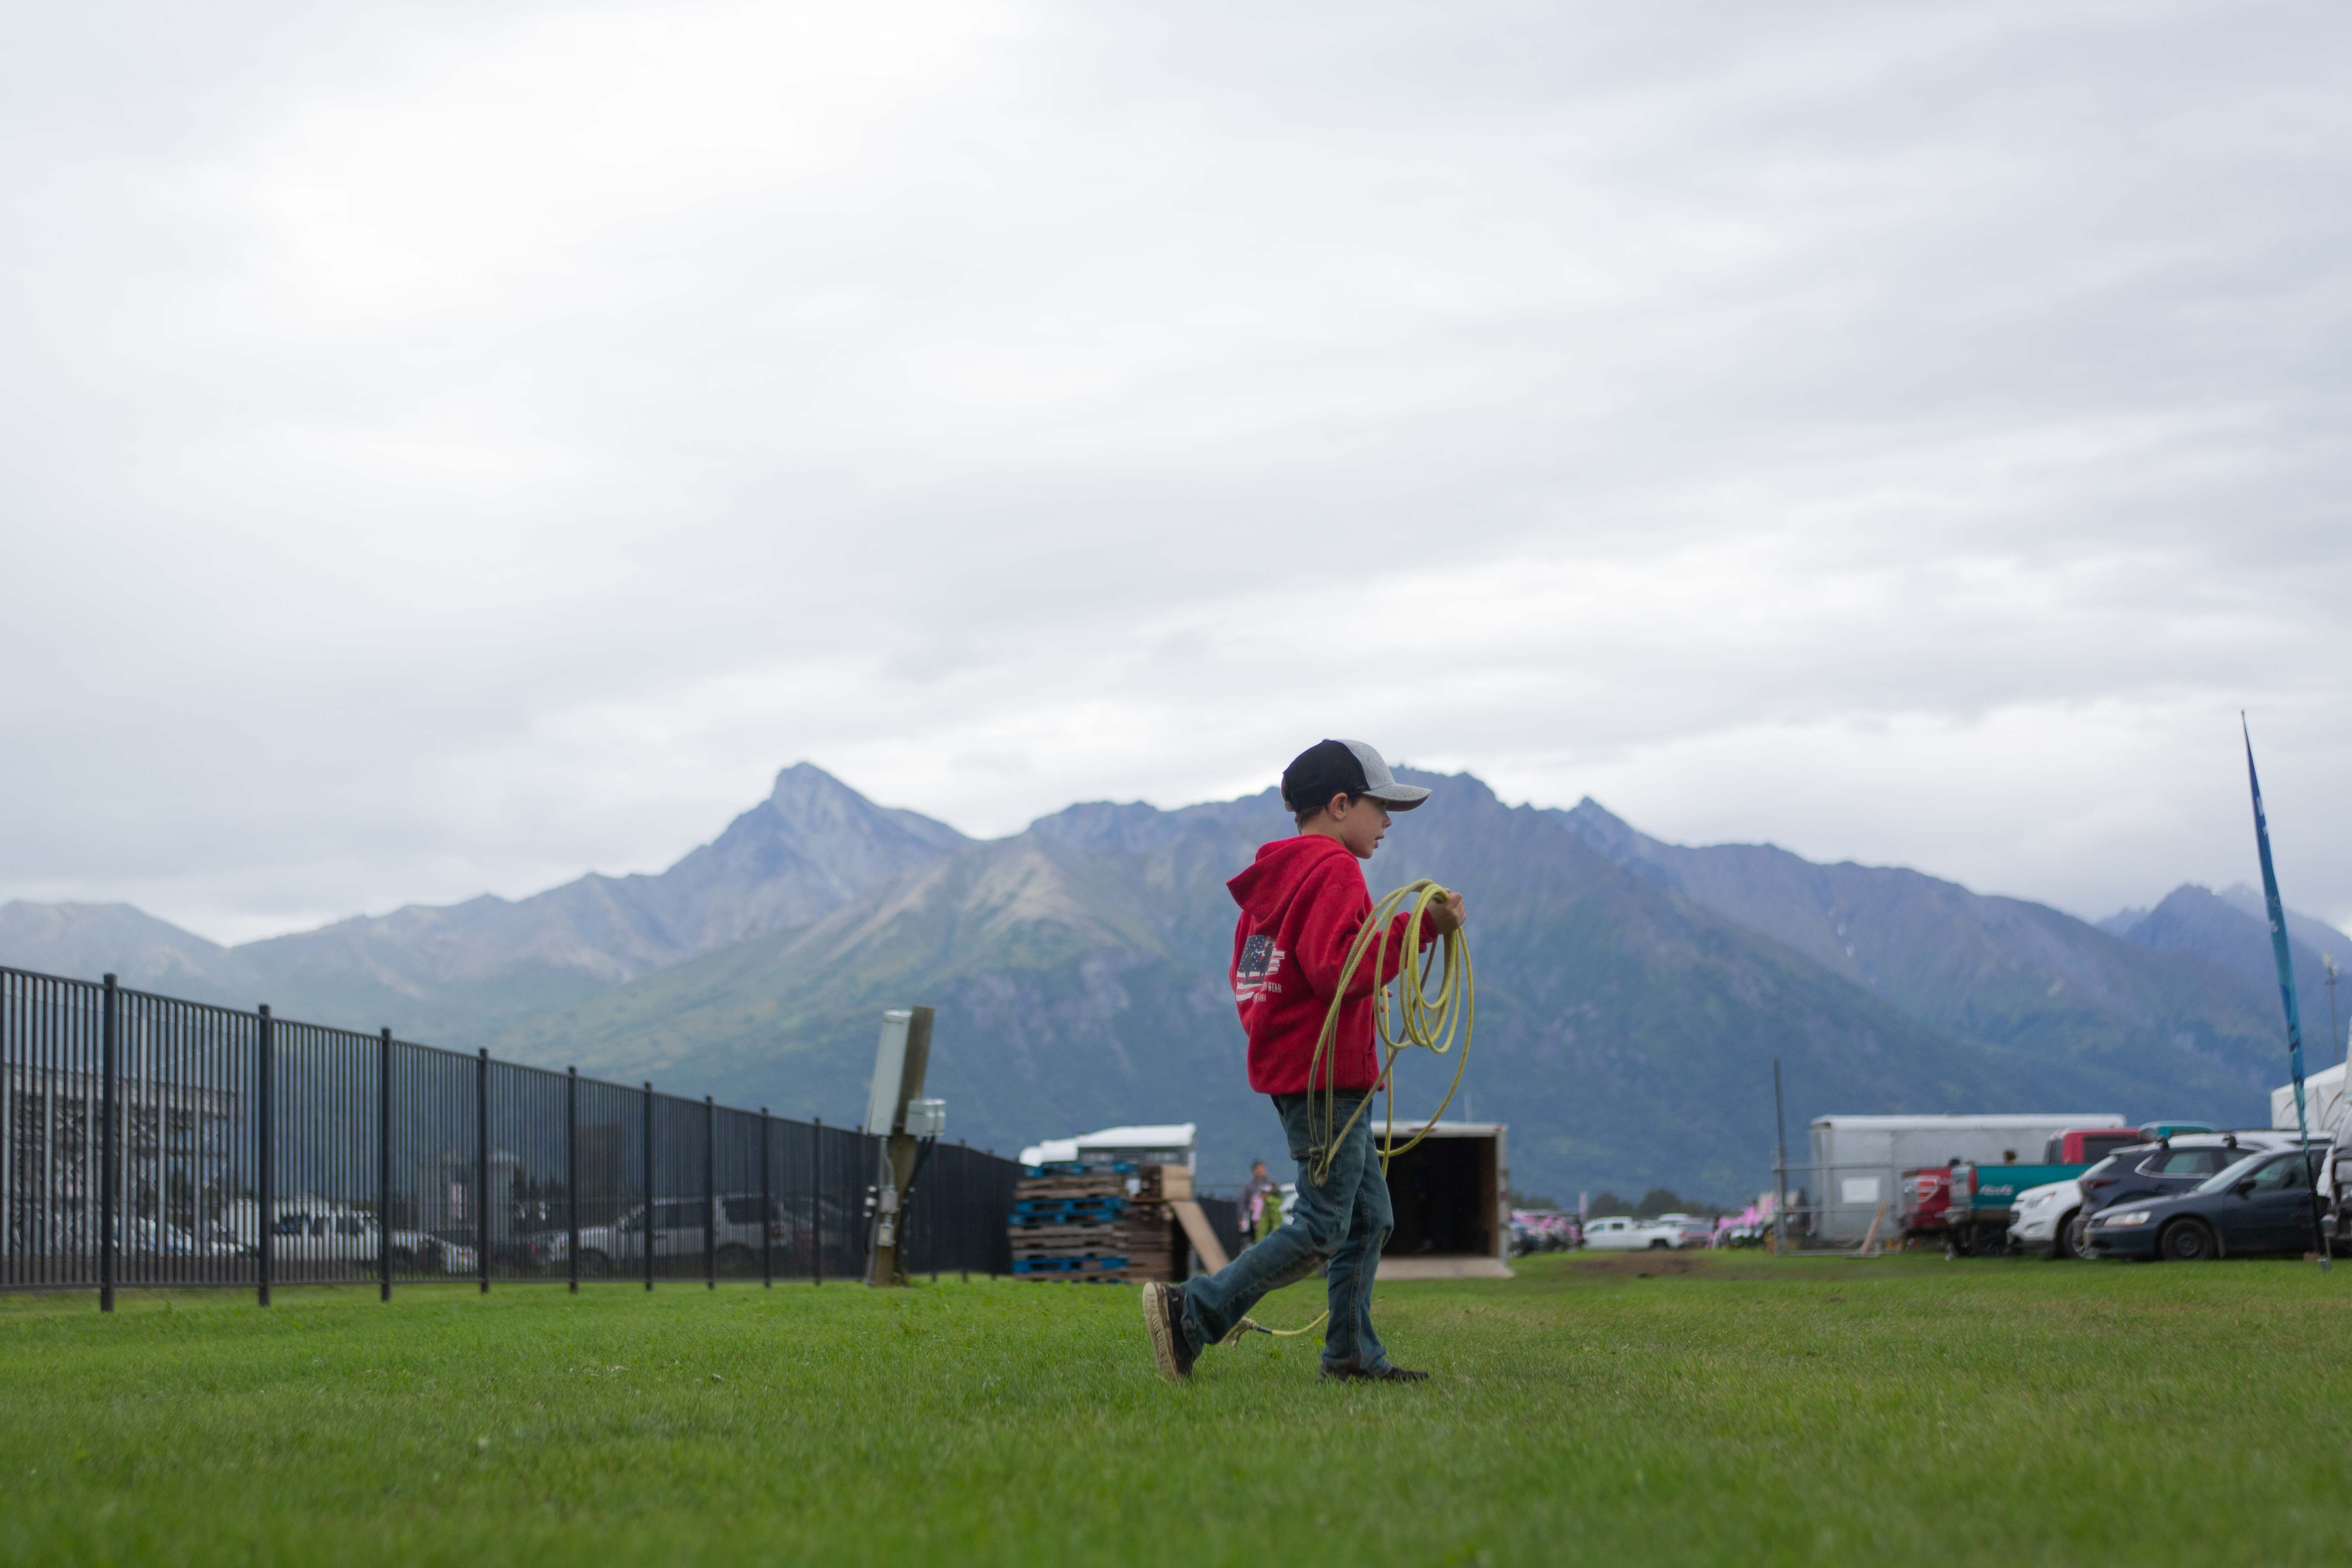 A boy holding a lasso walking across a field with the Alaskan mountains in the background.